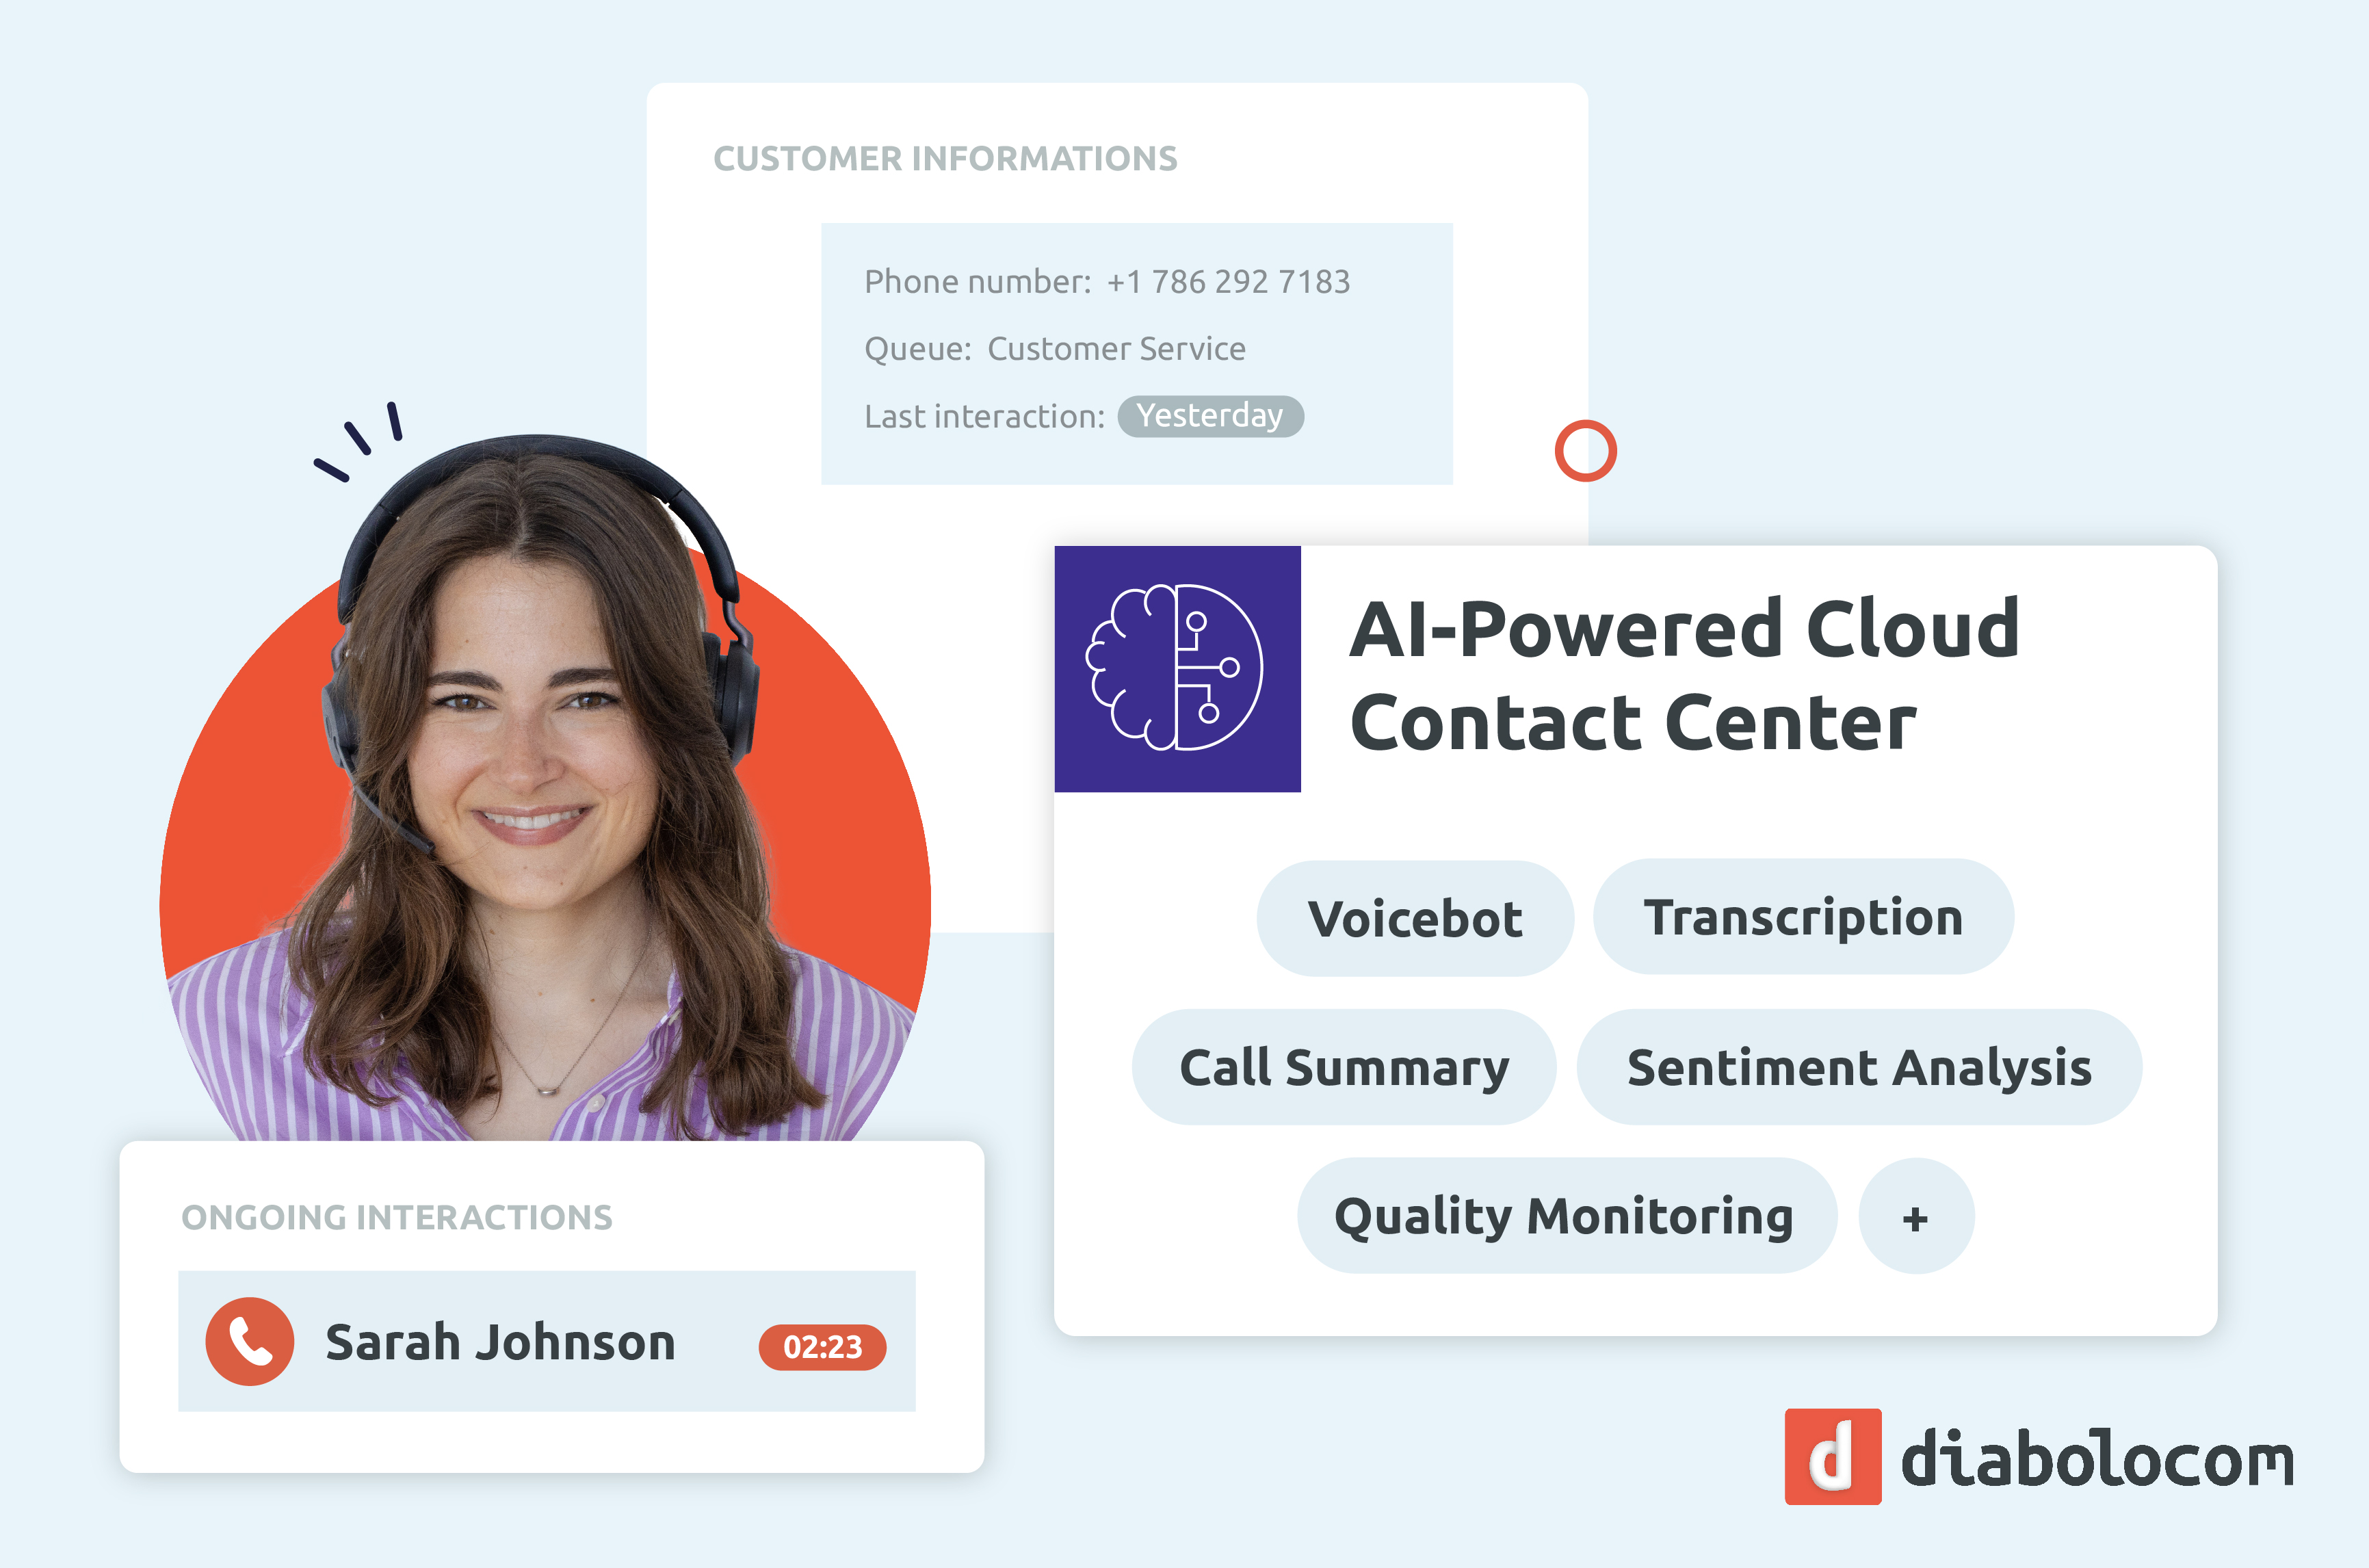 Diabolocom provides an AI-powered cloud contact center solution that enhances customer interactions with advanced features and analytics.